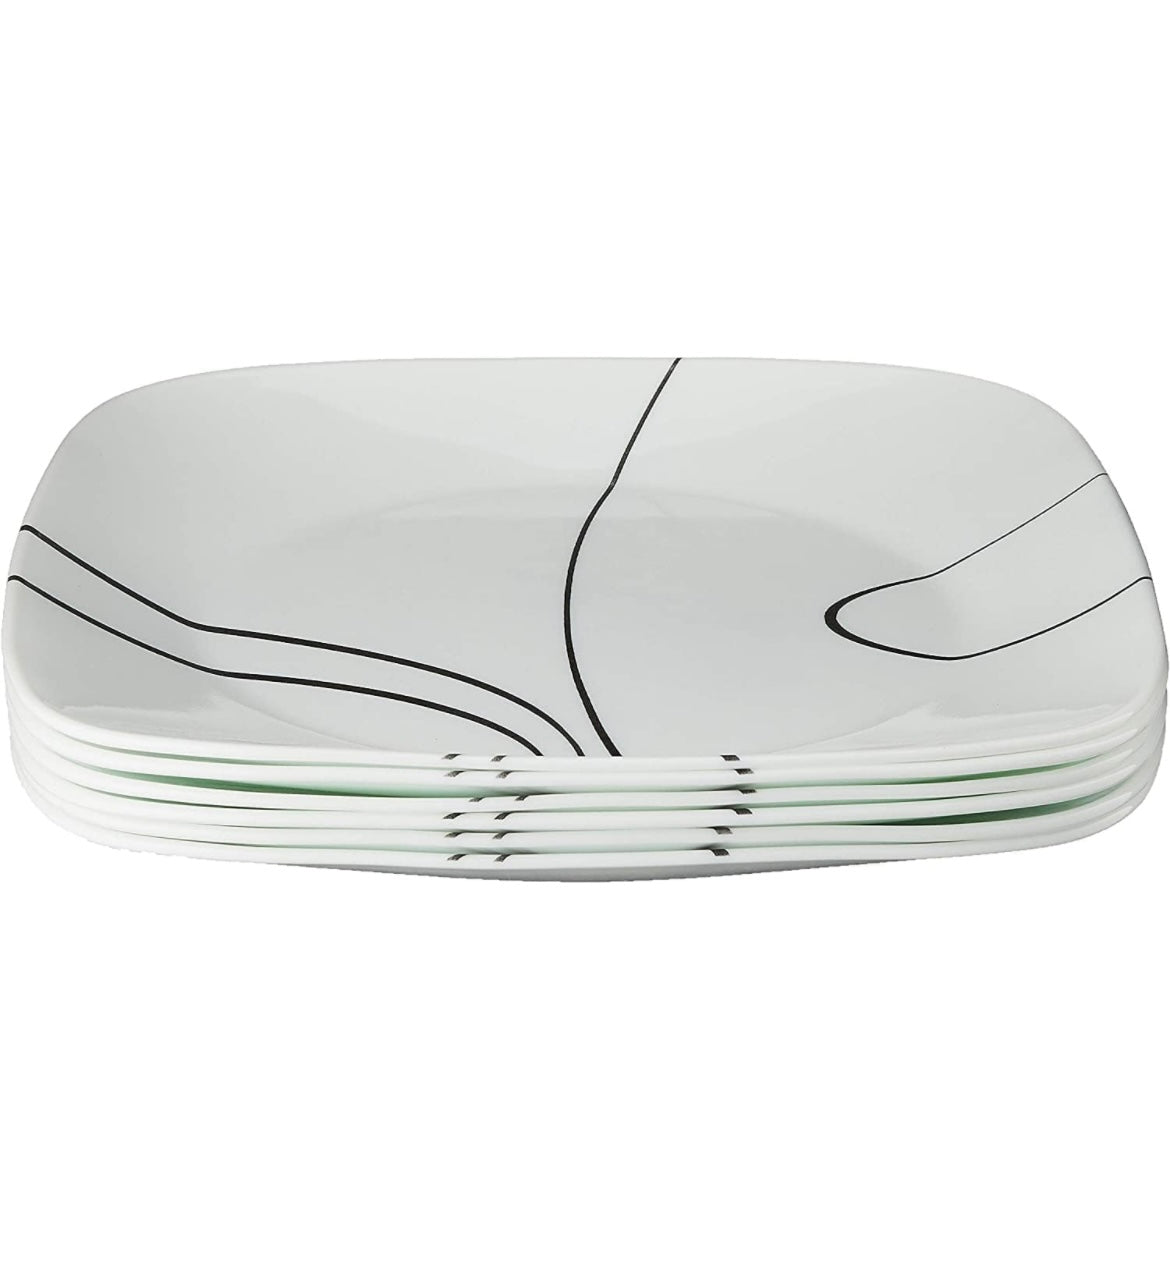 Corelle Vitrelle 6-Piece Dinner Plates Set, Triple Layer Glass and Chip Resistant, Lightweight Square 10-1/2-Inch Plates, Simple Lines